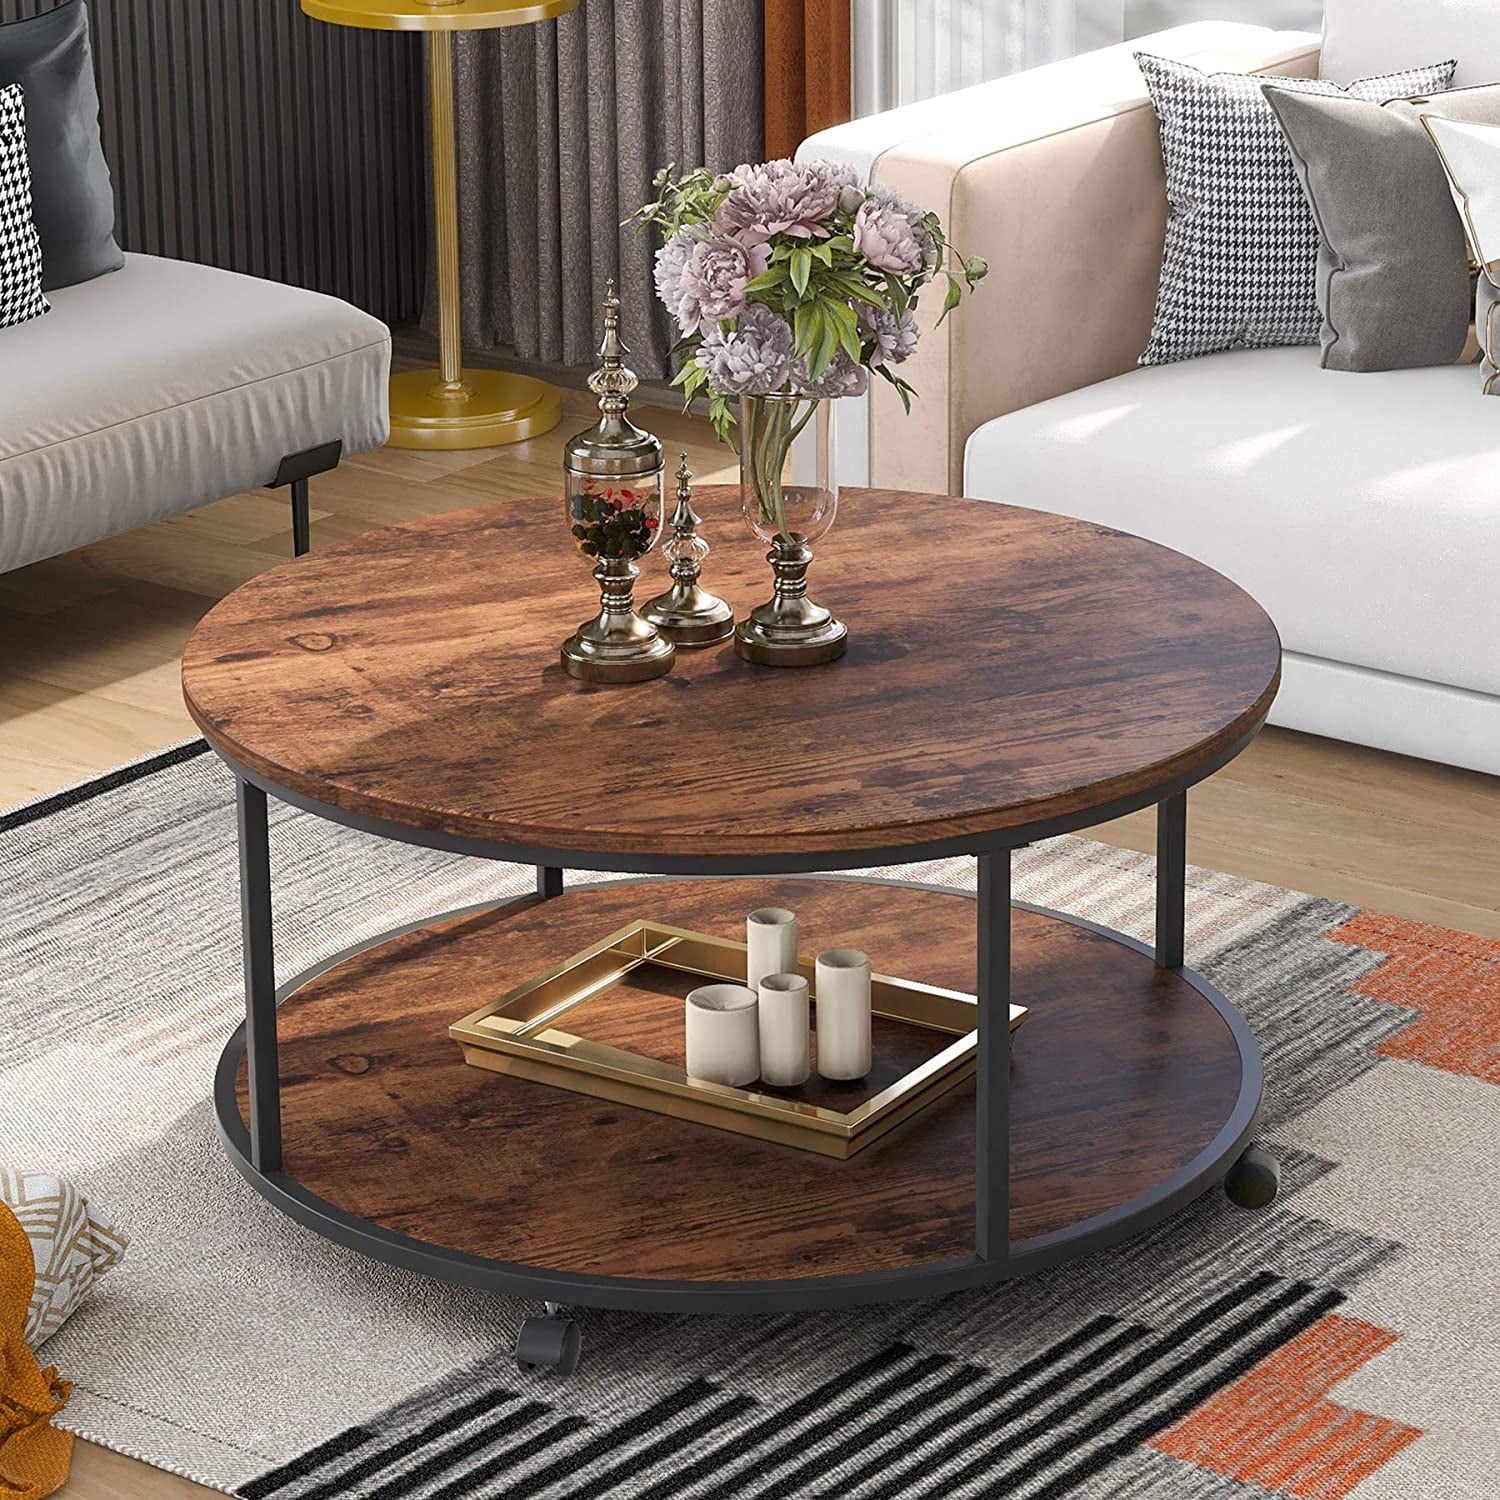 Wooden Coffee Table Designs For Living Room – Round Coffee Table Inside Brown Rustic Coffee Tables (View 11 of 15)